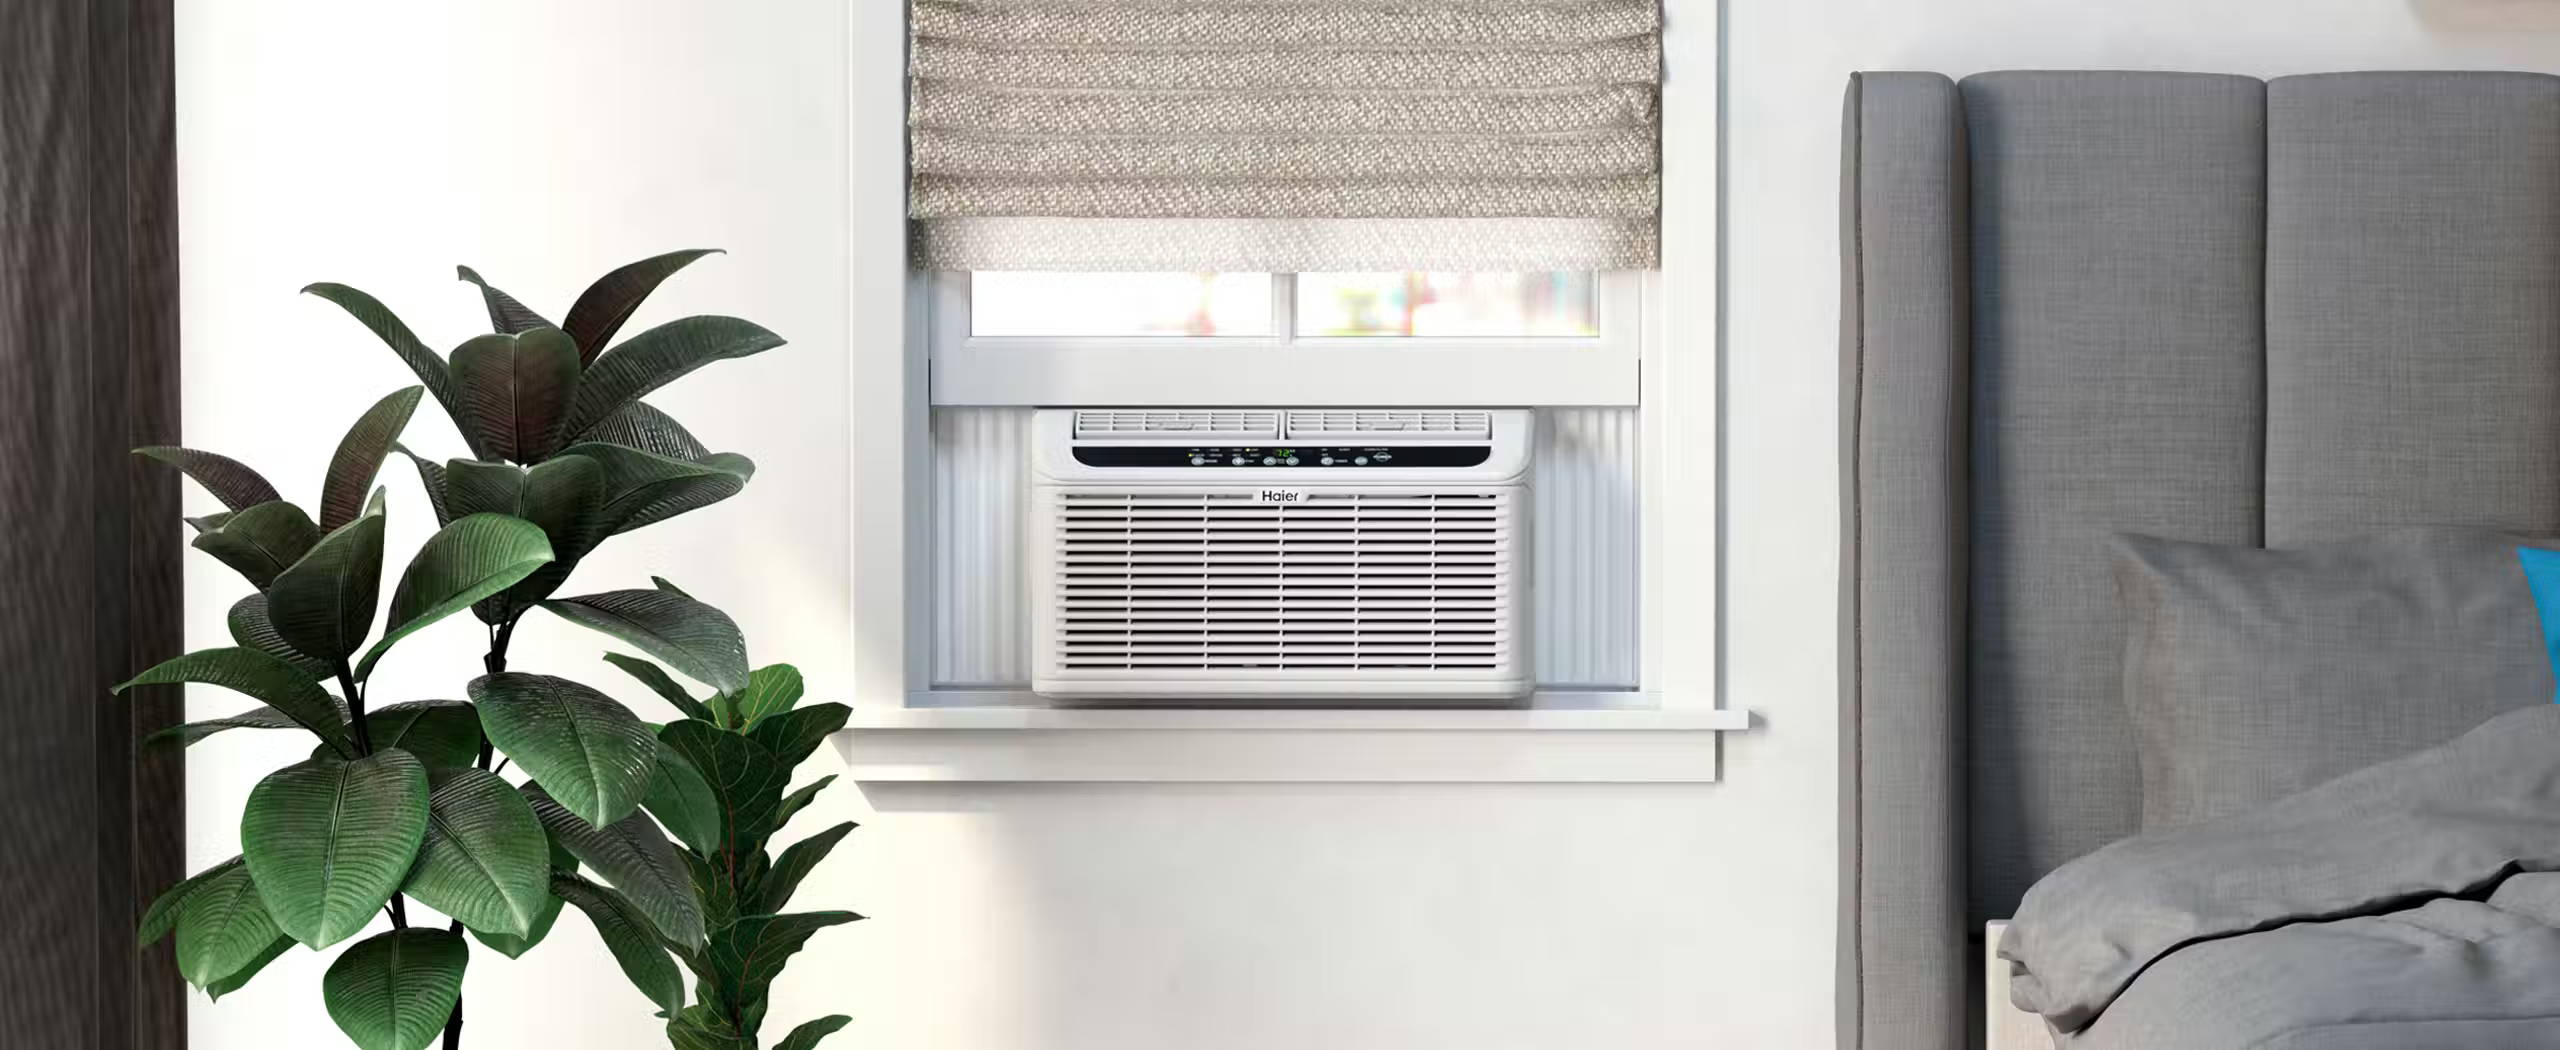 Haier window air conditioner in a bedroom window.